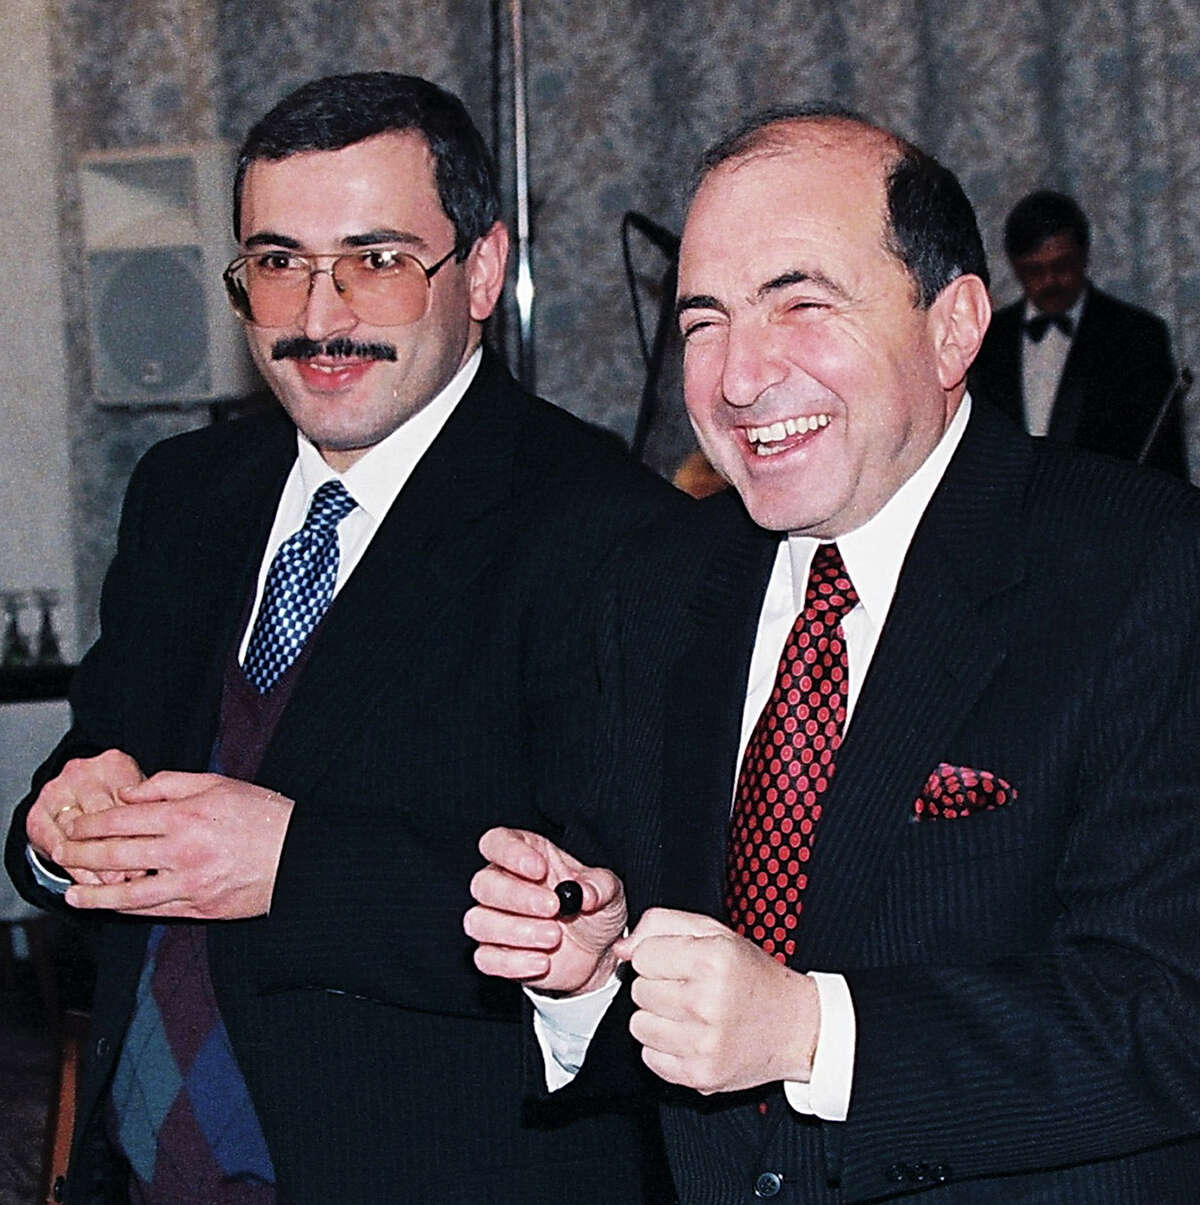 In this undated file photo, Boris Berezovsky, right, and Mikhail Khodarkovsky, two of Russia's most prominent tycoons, smile at a reception in Moscow.